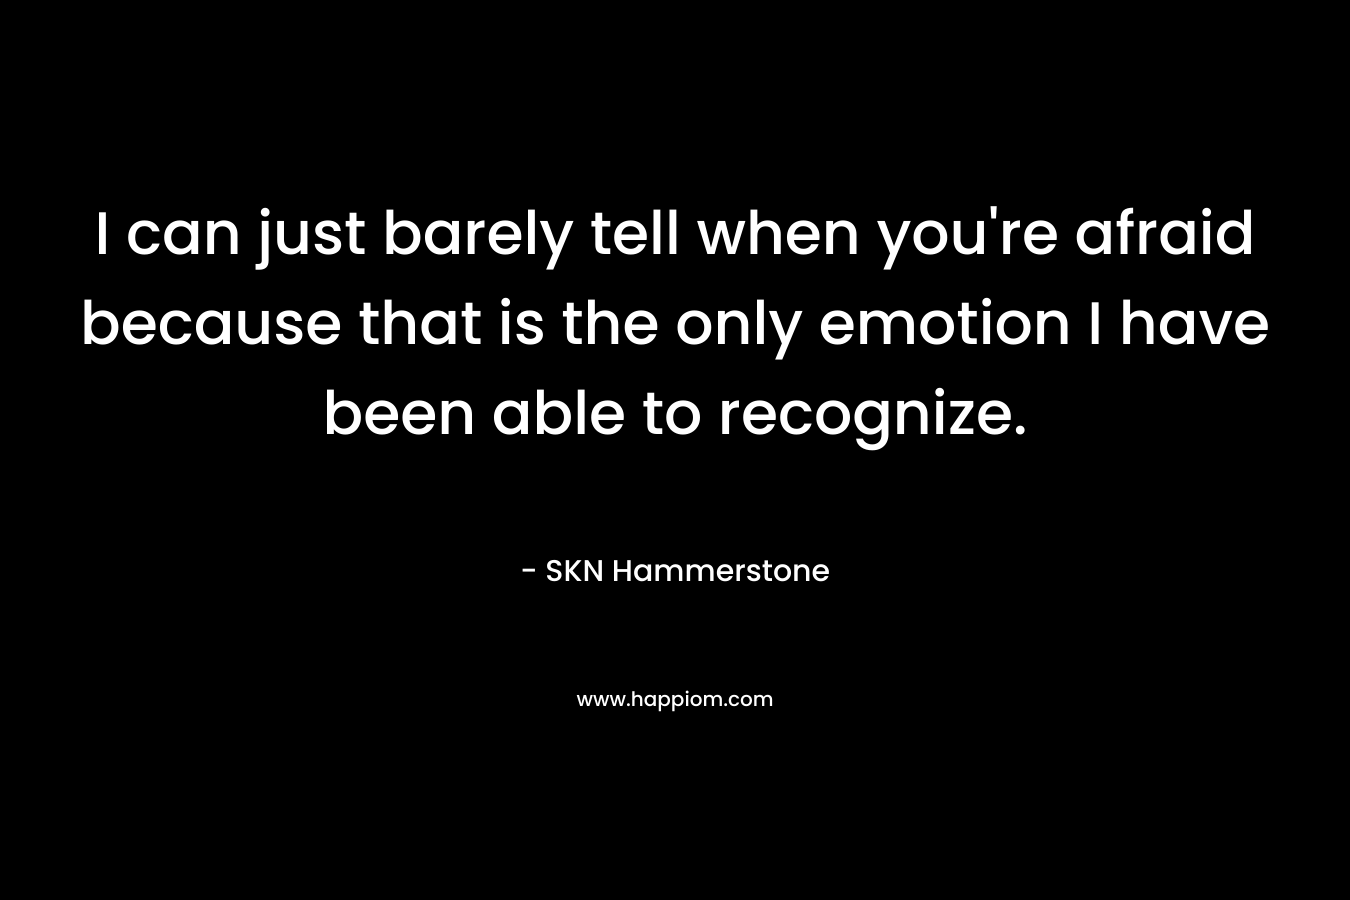 I can just barely tell when you’re afraid because that is the only emotion I have been able to recognize. – SKN Hammerstone